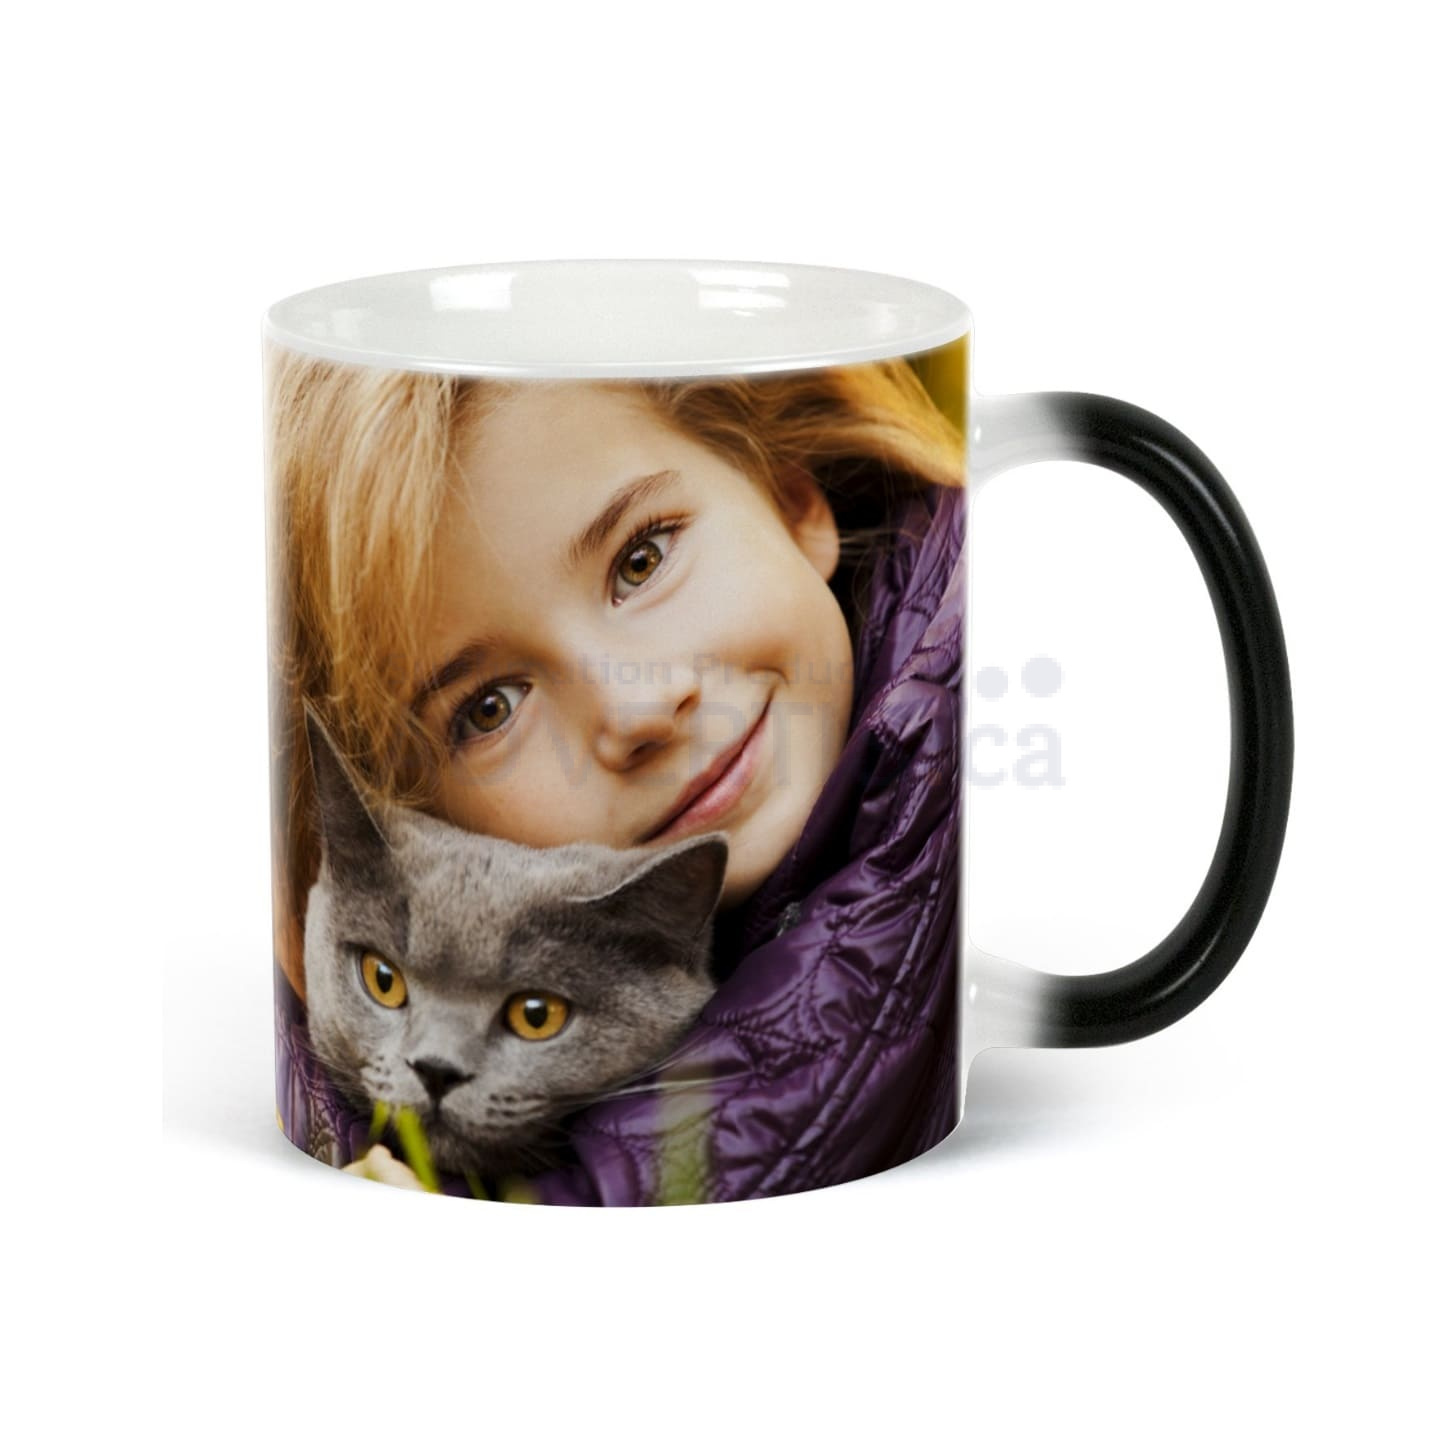 Enjoy your coffee or tea every morning with our mug!